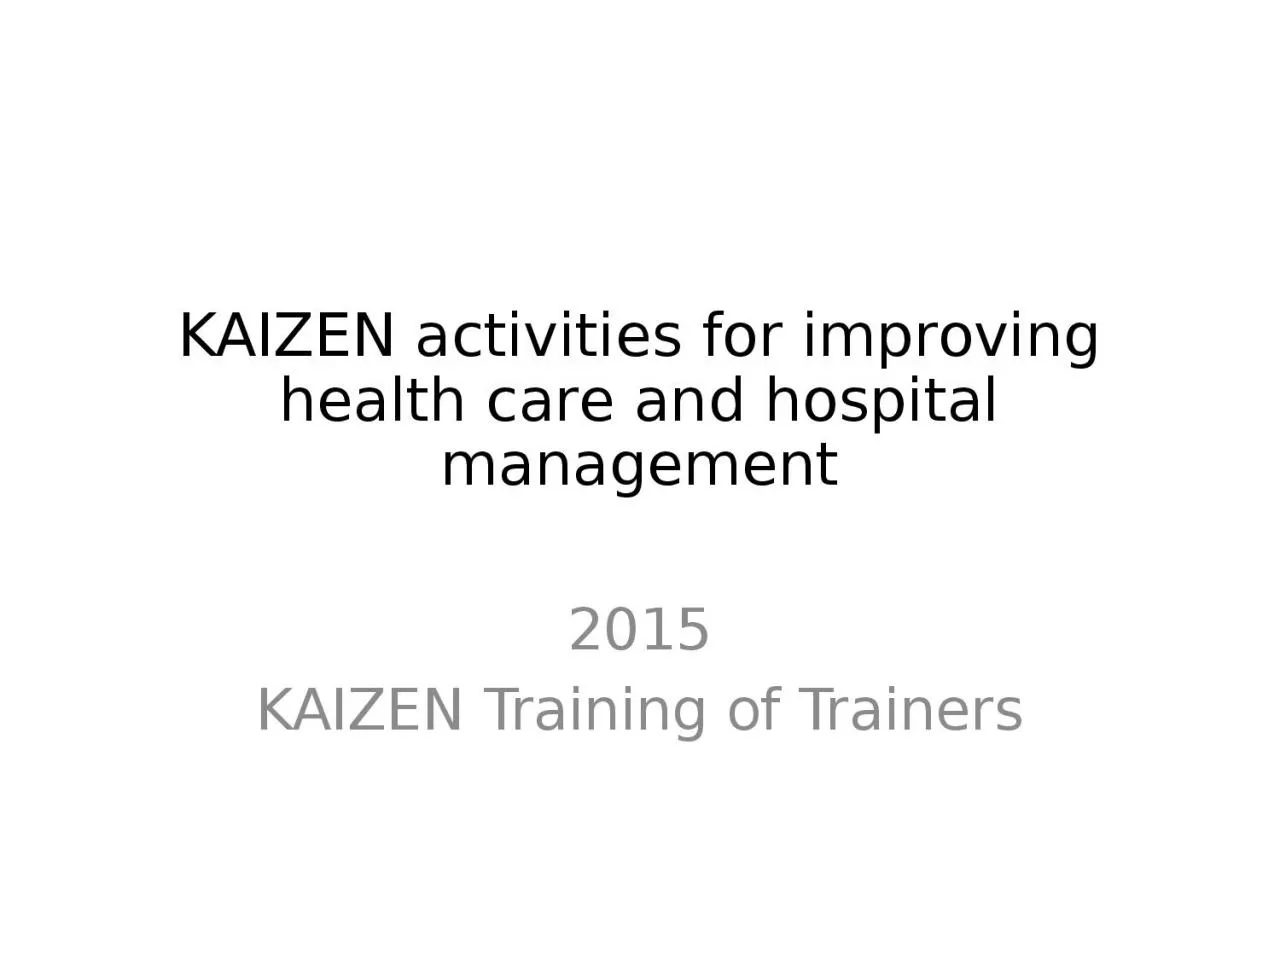 KAIZEN activities for improving health care and hospital management